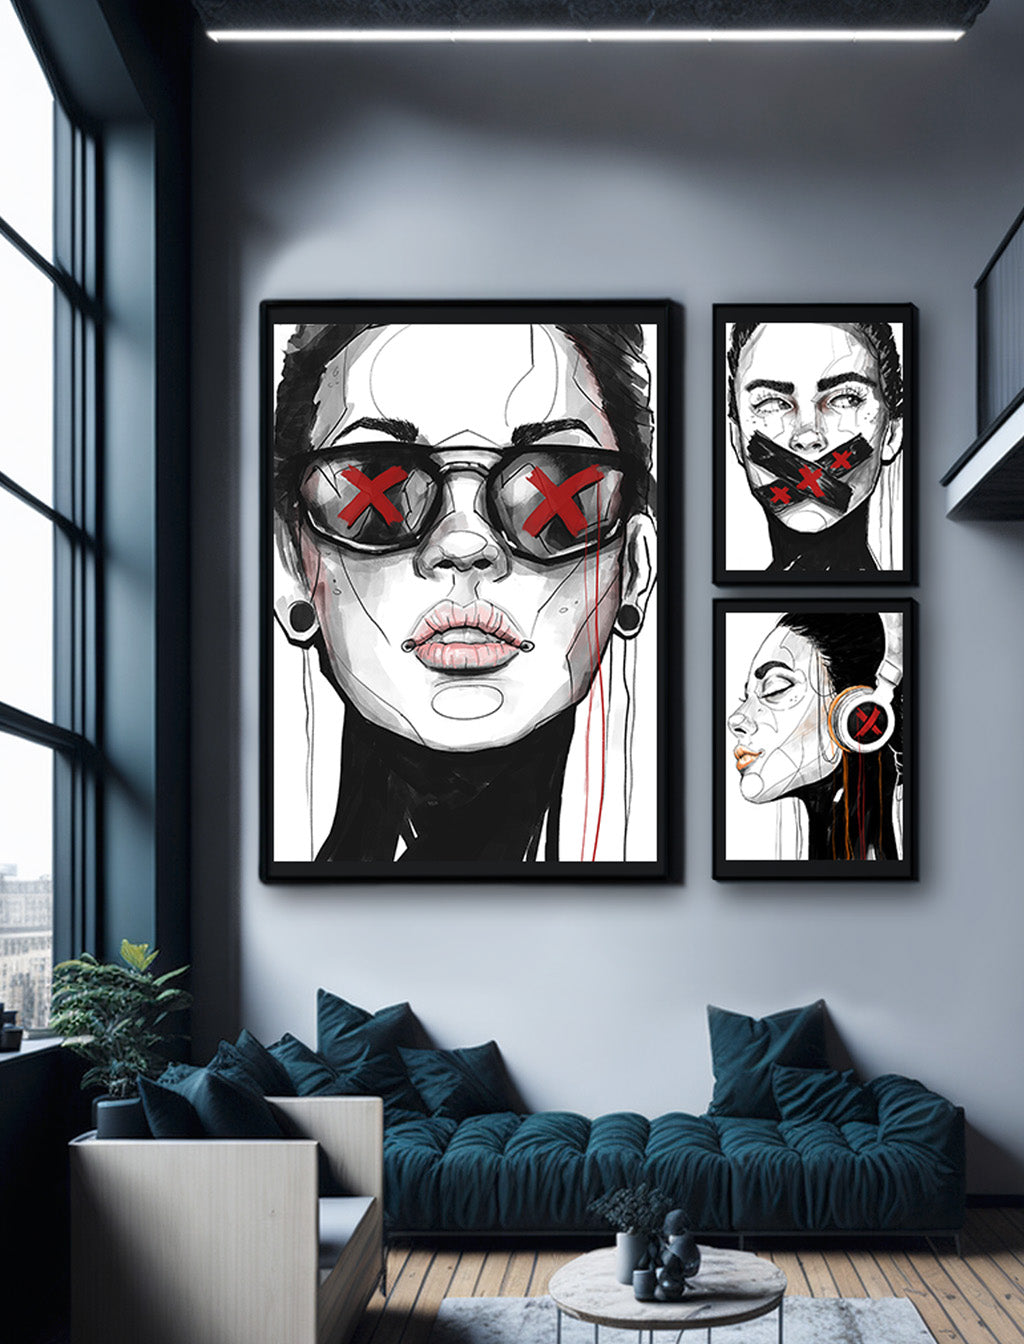 BUNDLE of limited art prints 'Don´t speak', 'Won´t see' and 'Can’t hear' - 3 Monkeys collection